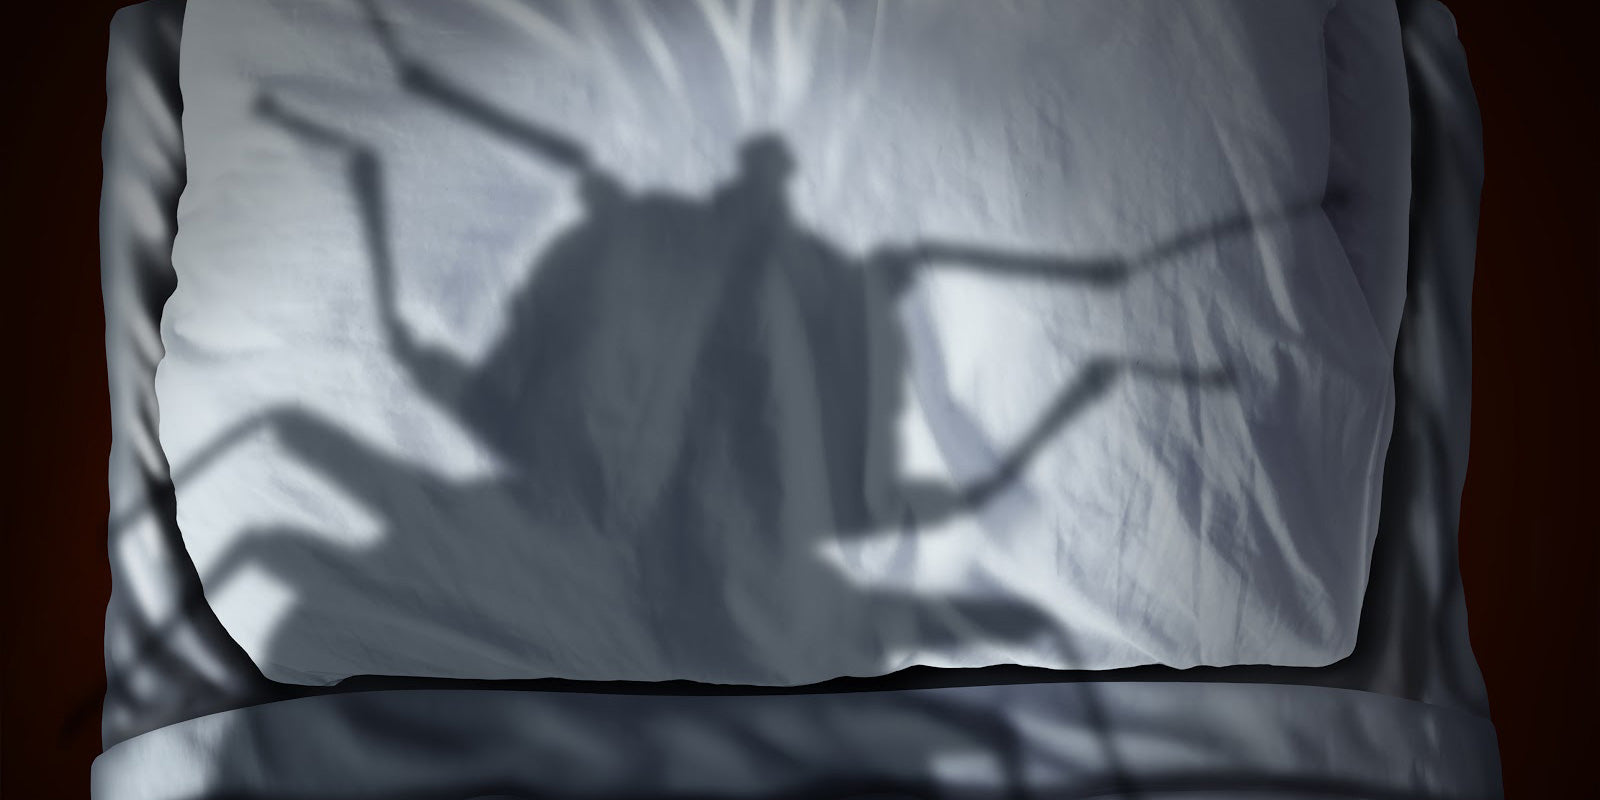 Enlarged shadow of a bed bug on a bed